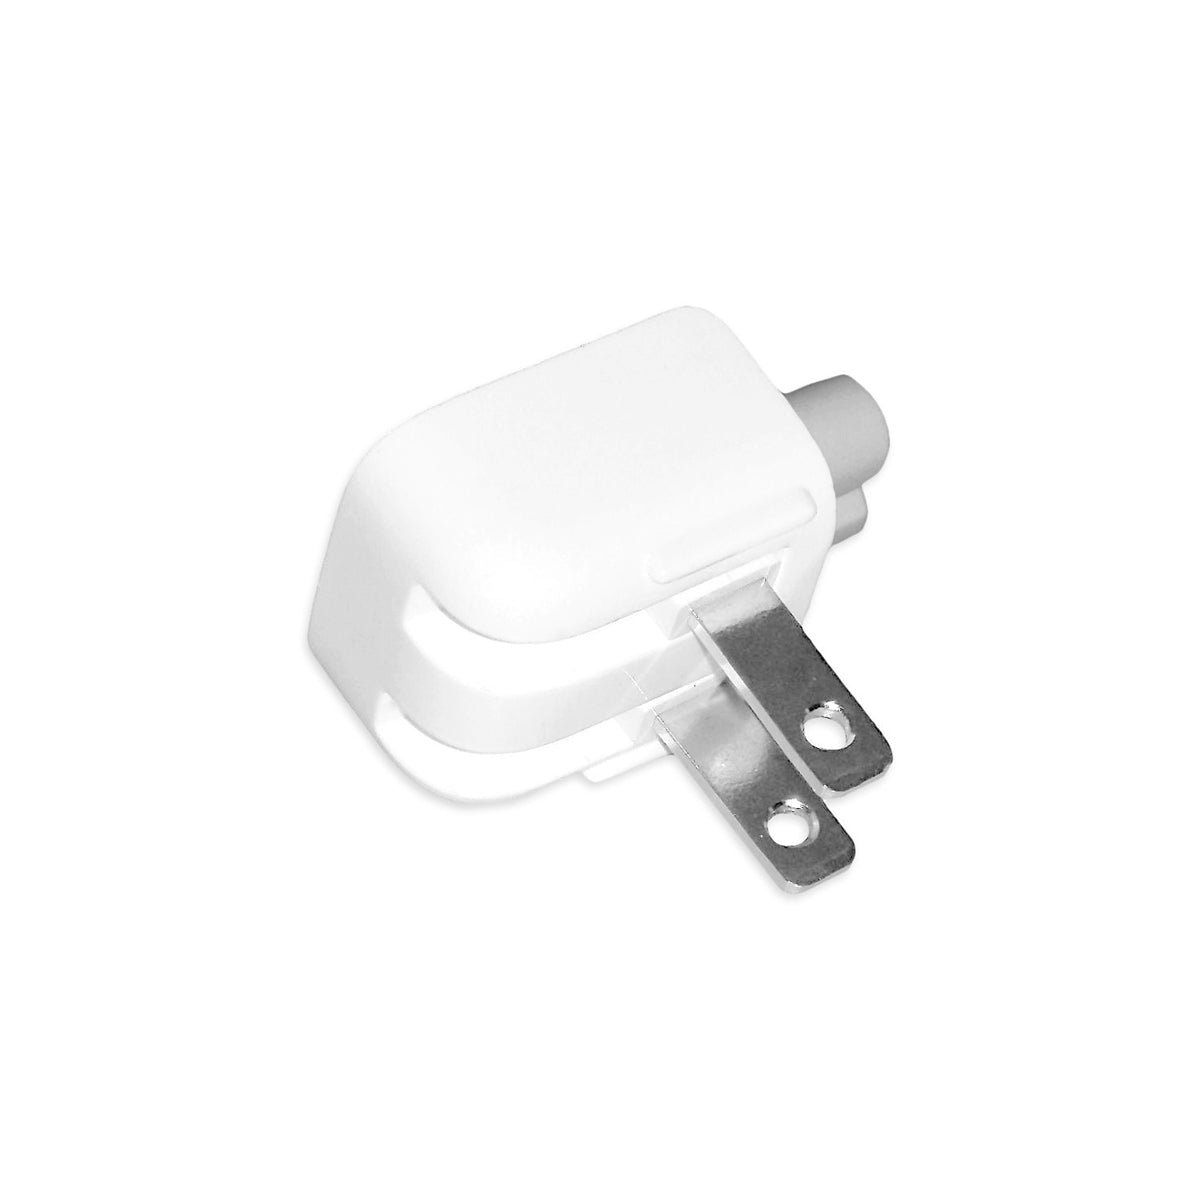 For Apple A1555 iPad Duck Head Adapter Plug 2 Pin 125V-2.5A White-Chargers-First Help Tech